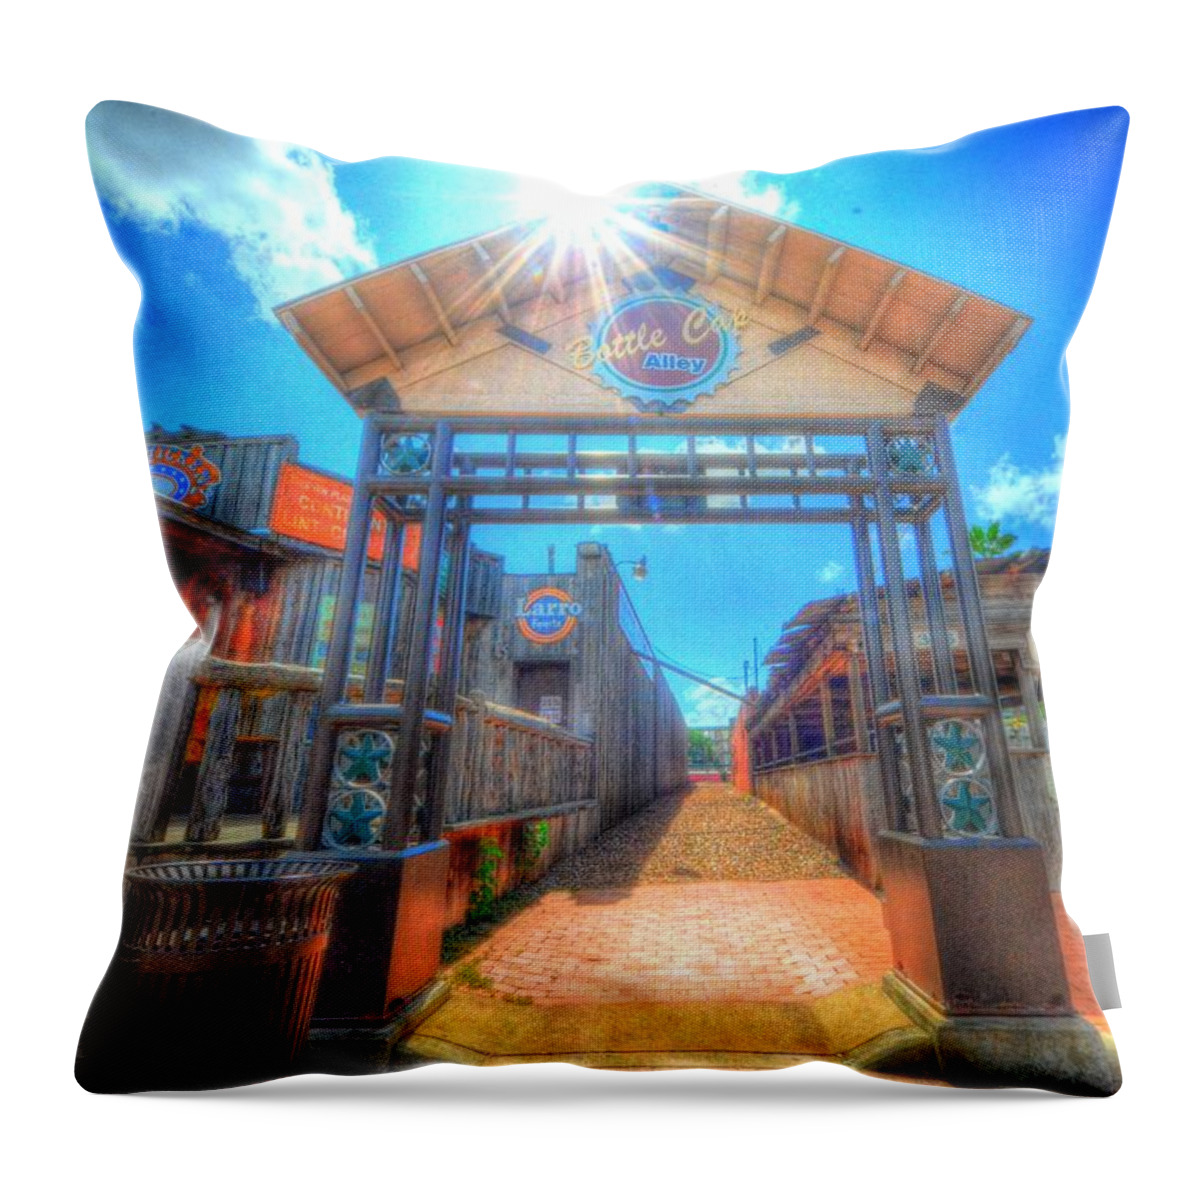 Bottle Cap Alley Throw Pillow featuring the photograph Bottle Cap Alley by David Morefield